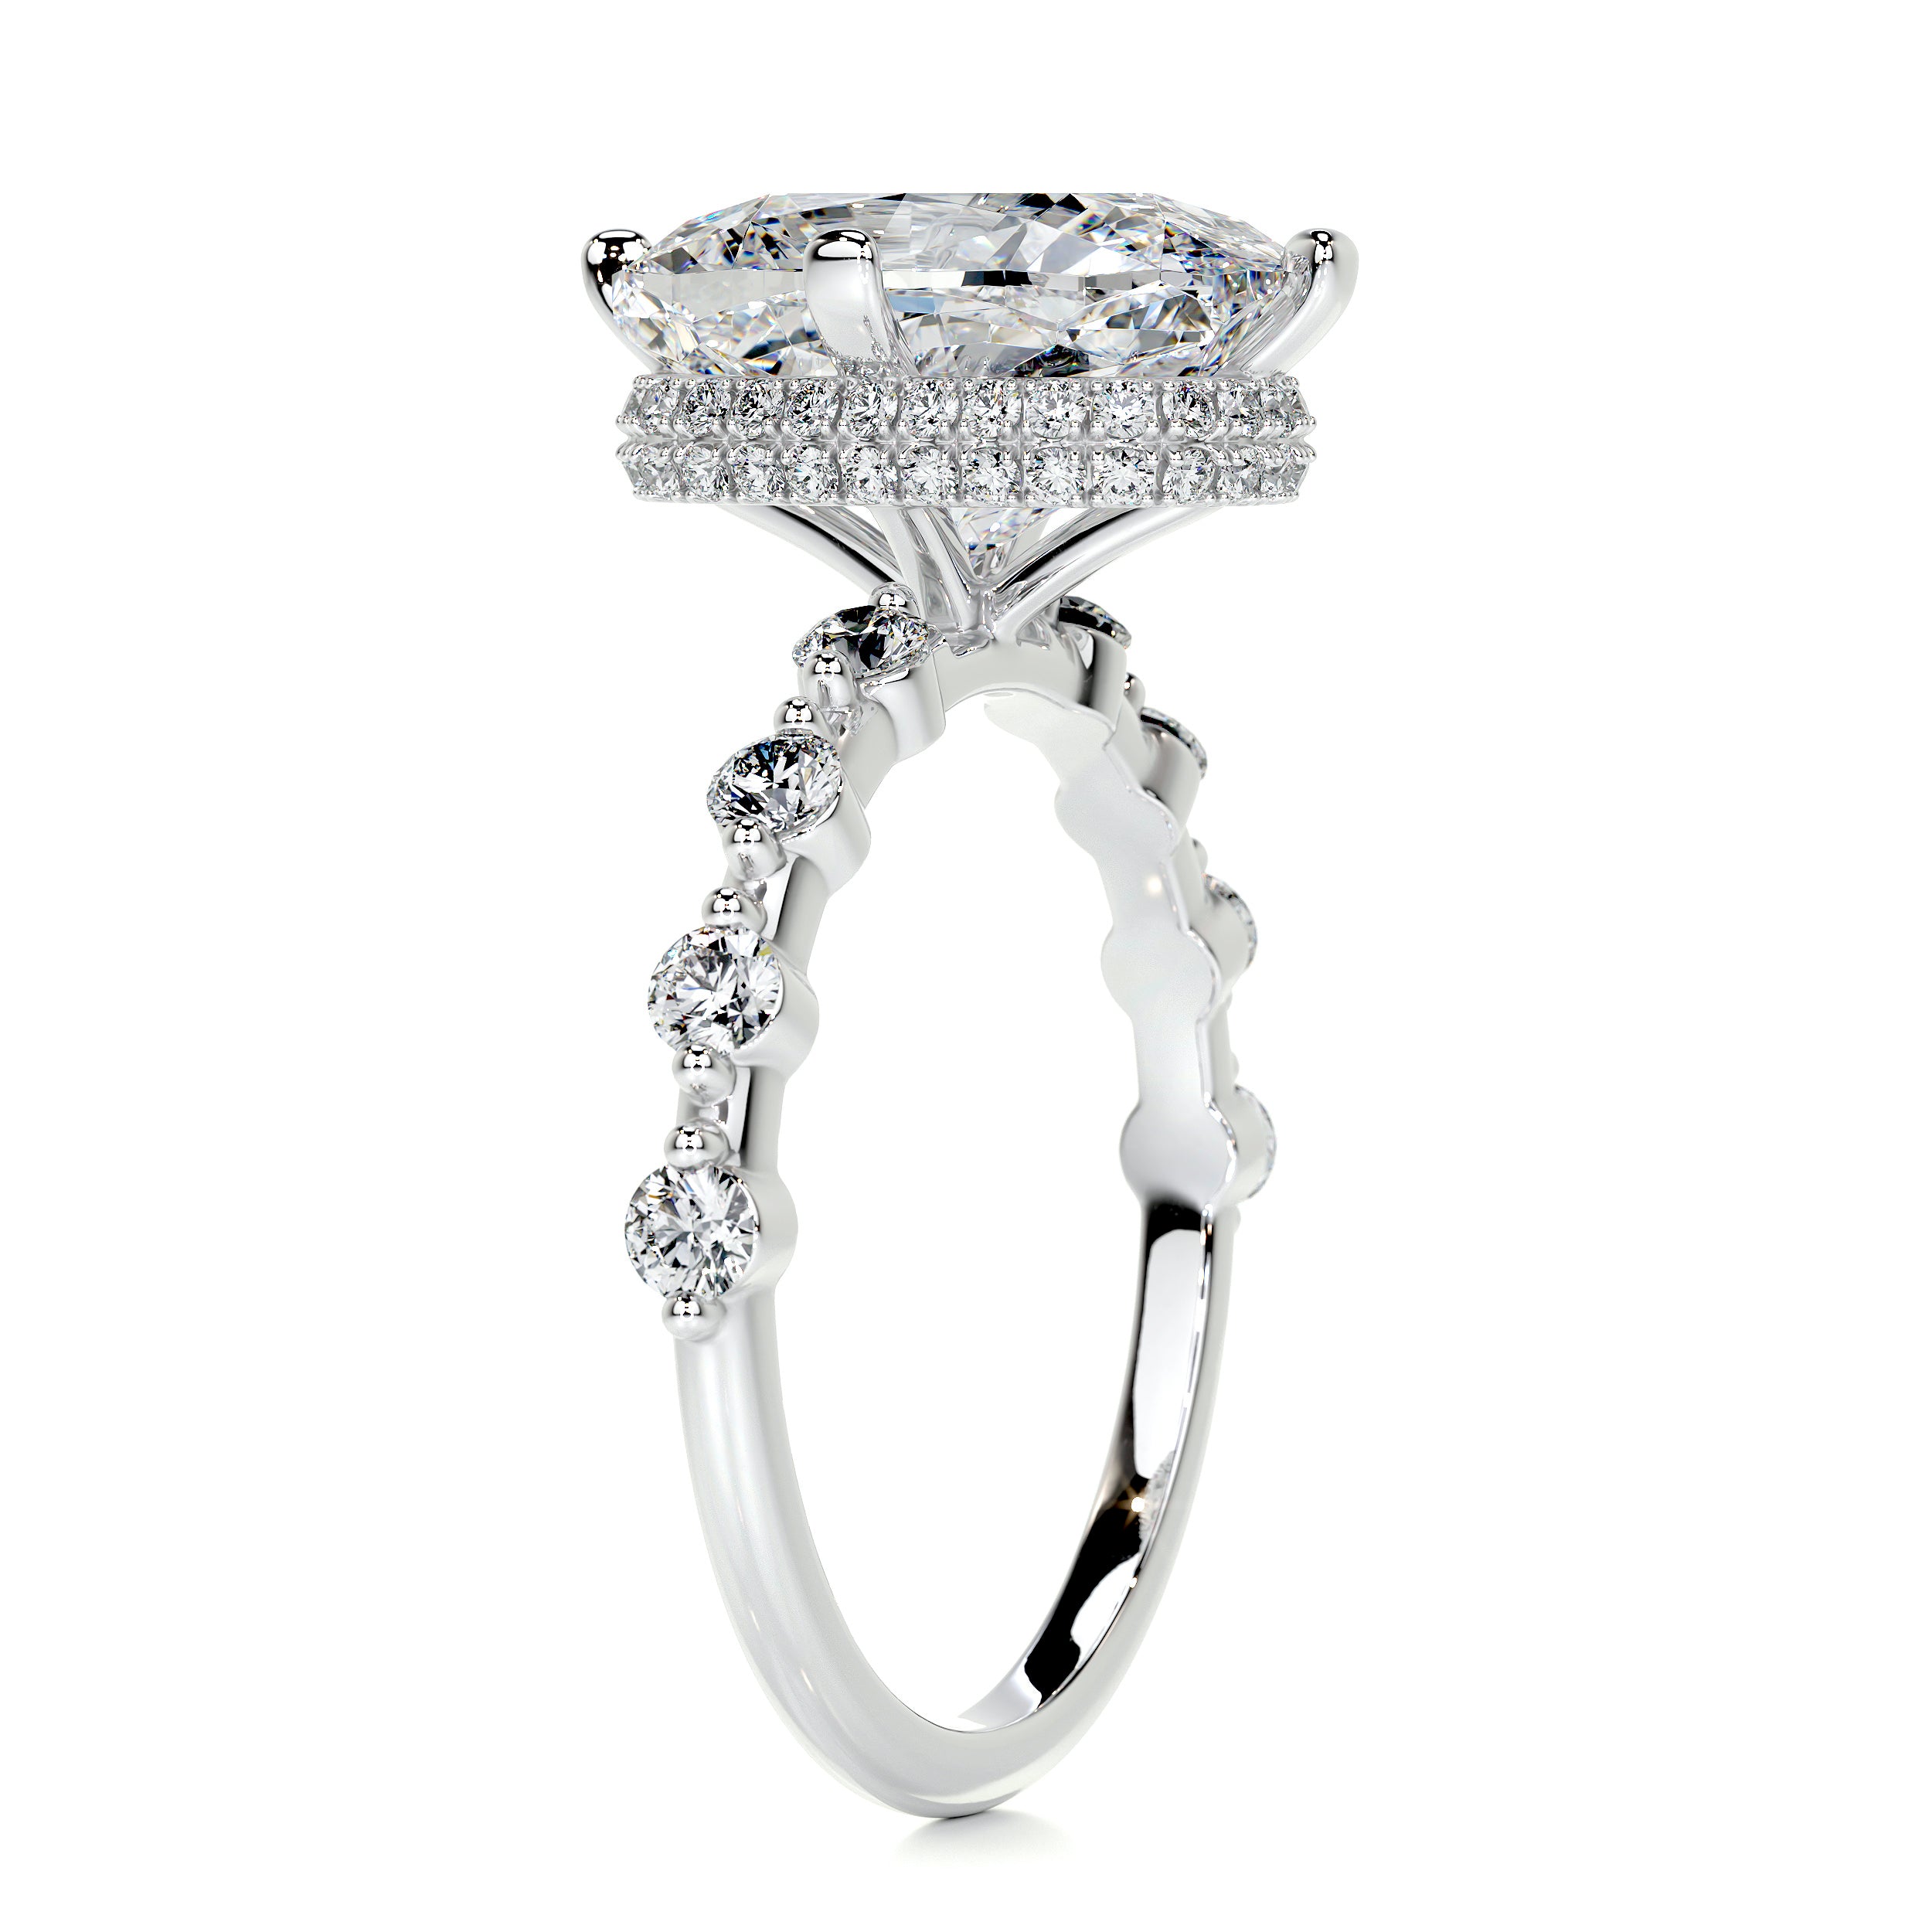 6 Carat Cushion Cut Diamond Rings | Find The Perfect Diamond For YOU